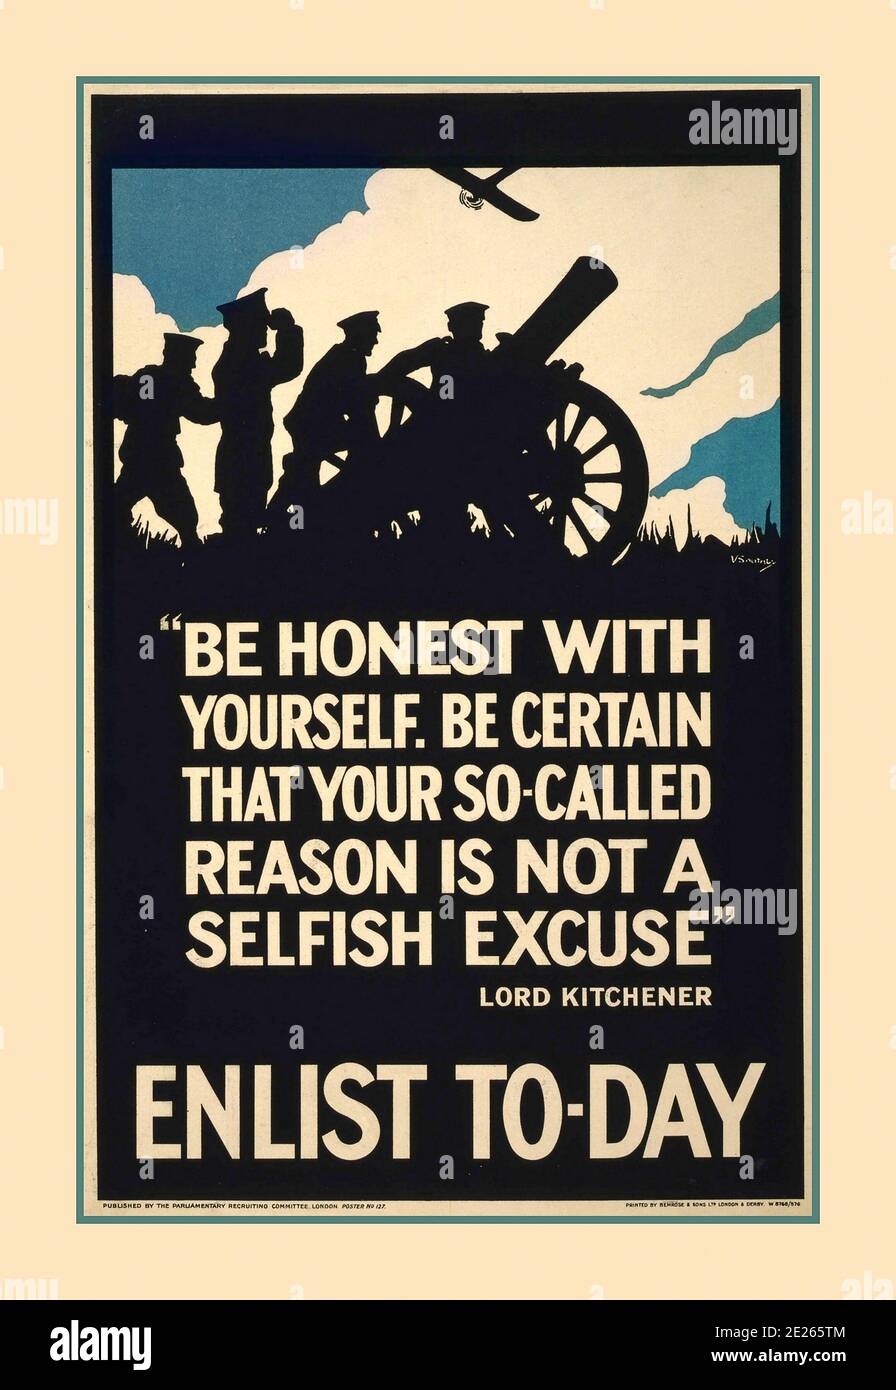 ENLIST TODAY WW1 1915 Vintage UK Recruiting Propaganda  WW1 Poster British ' Be honest with yourself. Be certain that your so-called reason is not a selfish excuse.' Lord Kitchener. Enlist to-day 1914 World War 1 Vintage propaganda recruitment poster from Lord Kitchener ENLIST TODAY Stock Photo